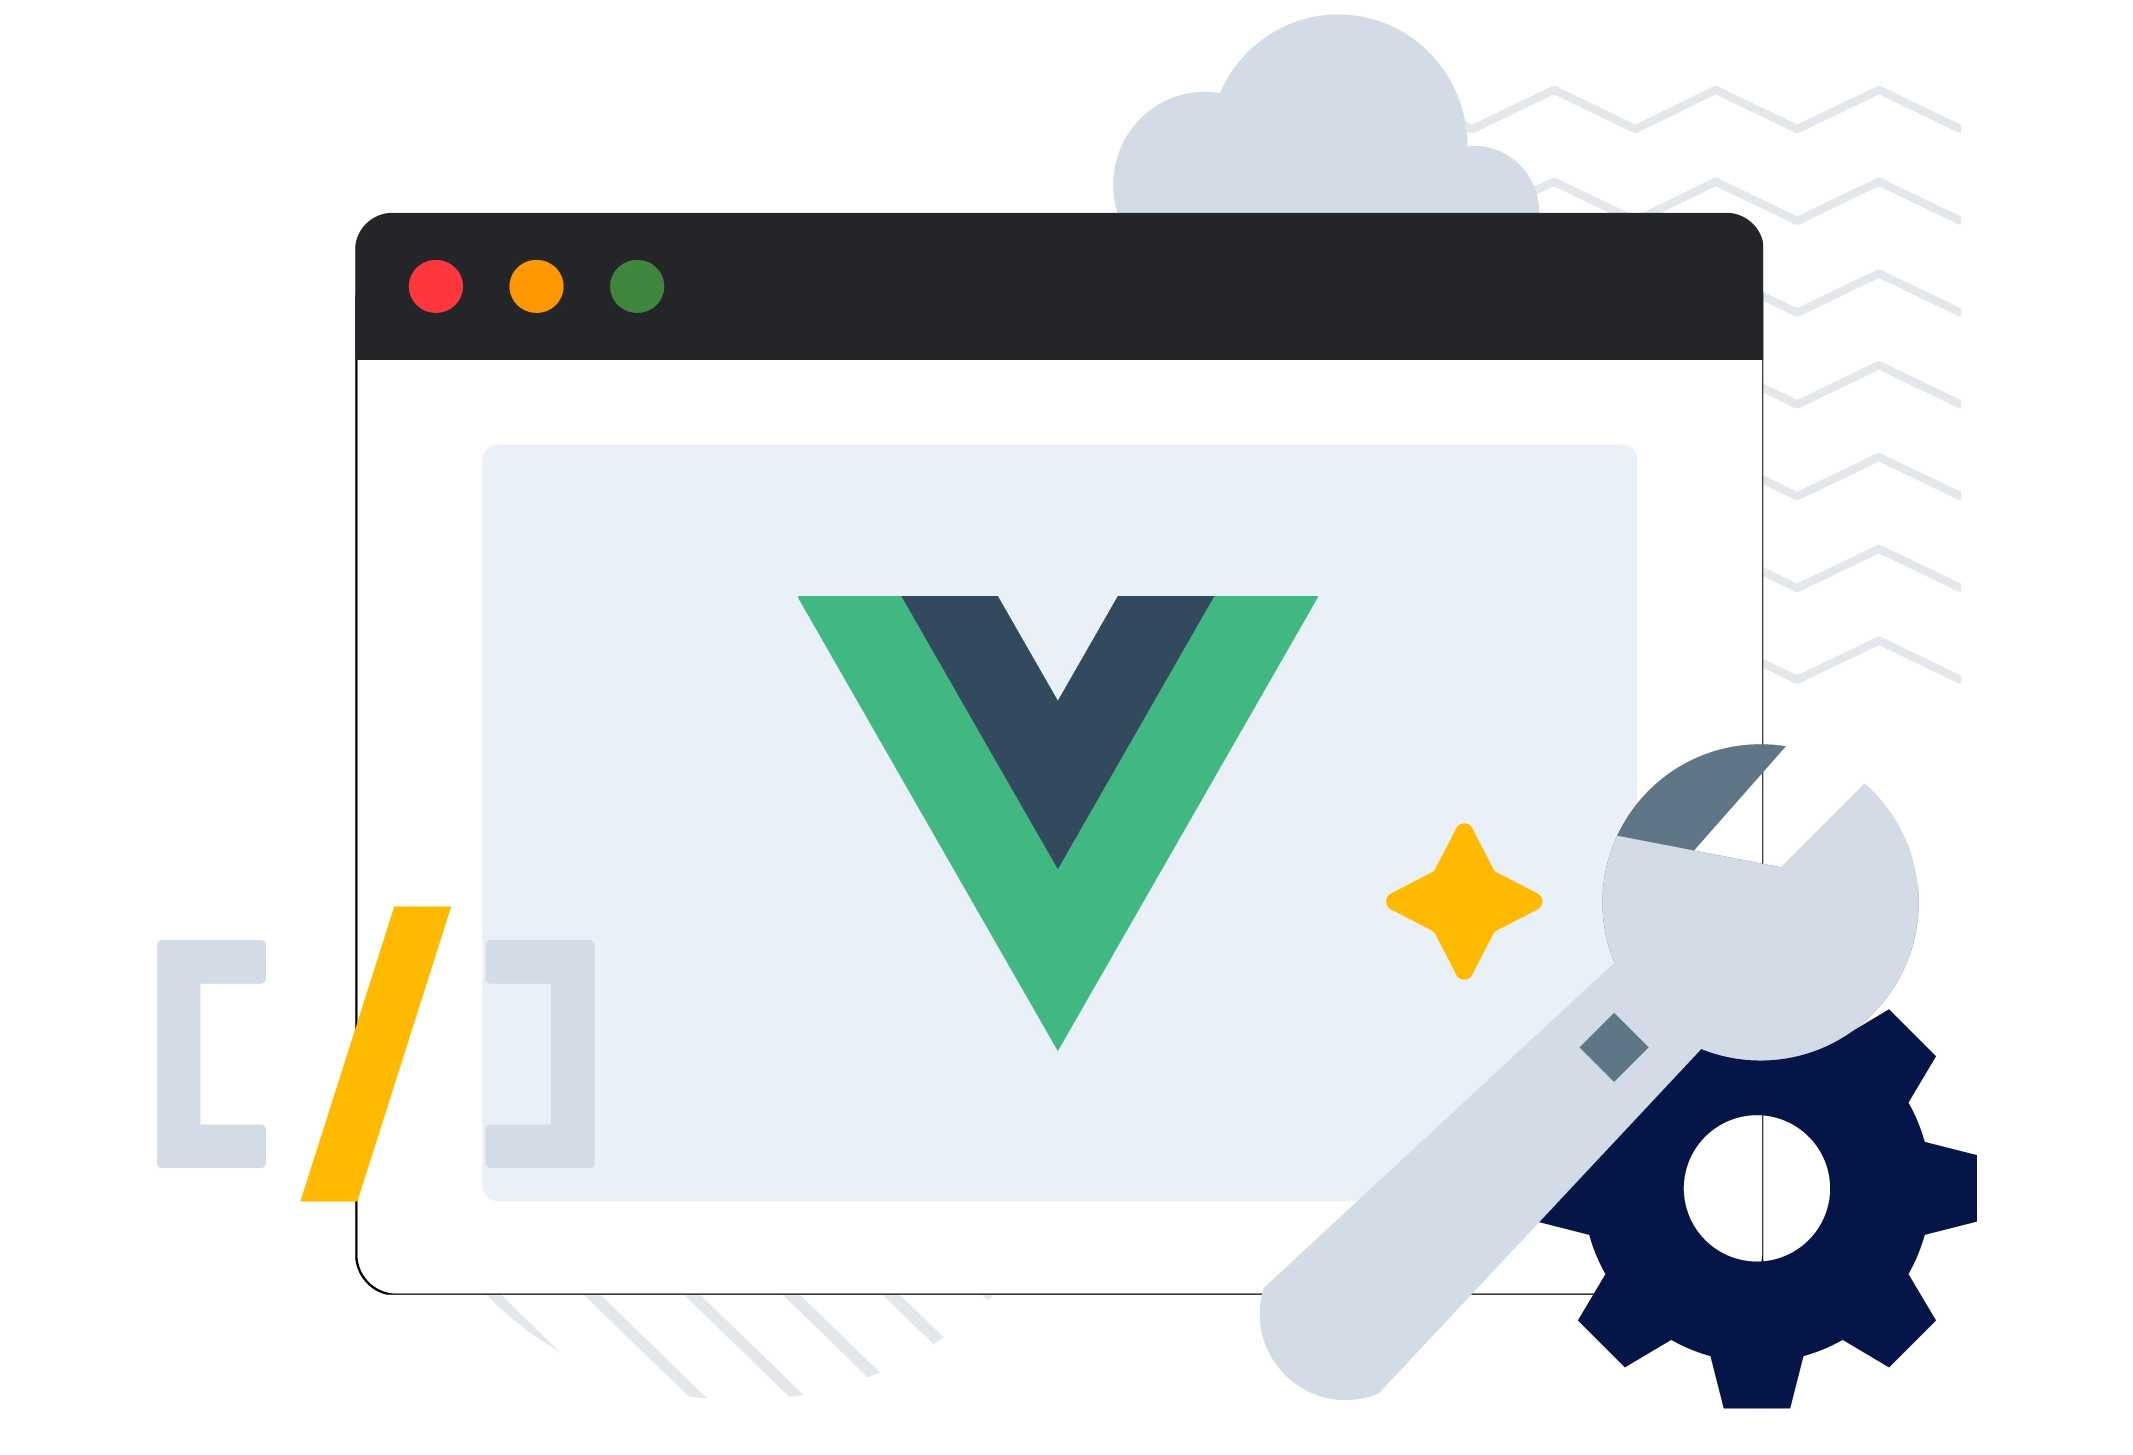 vue component library